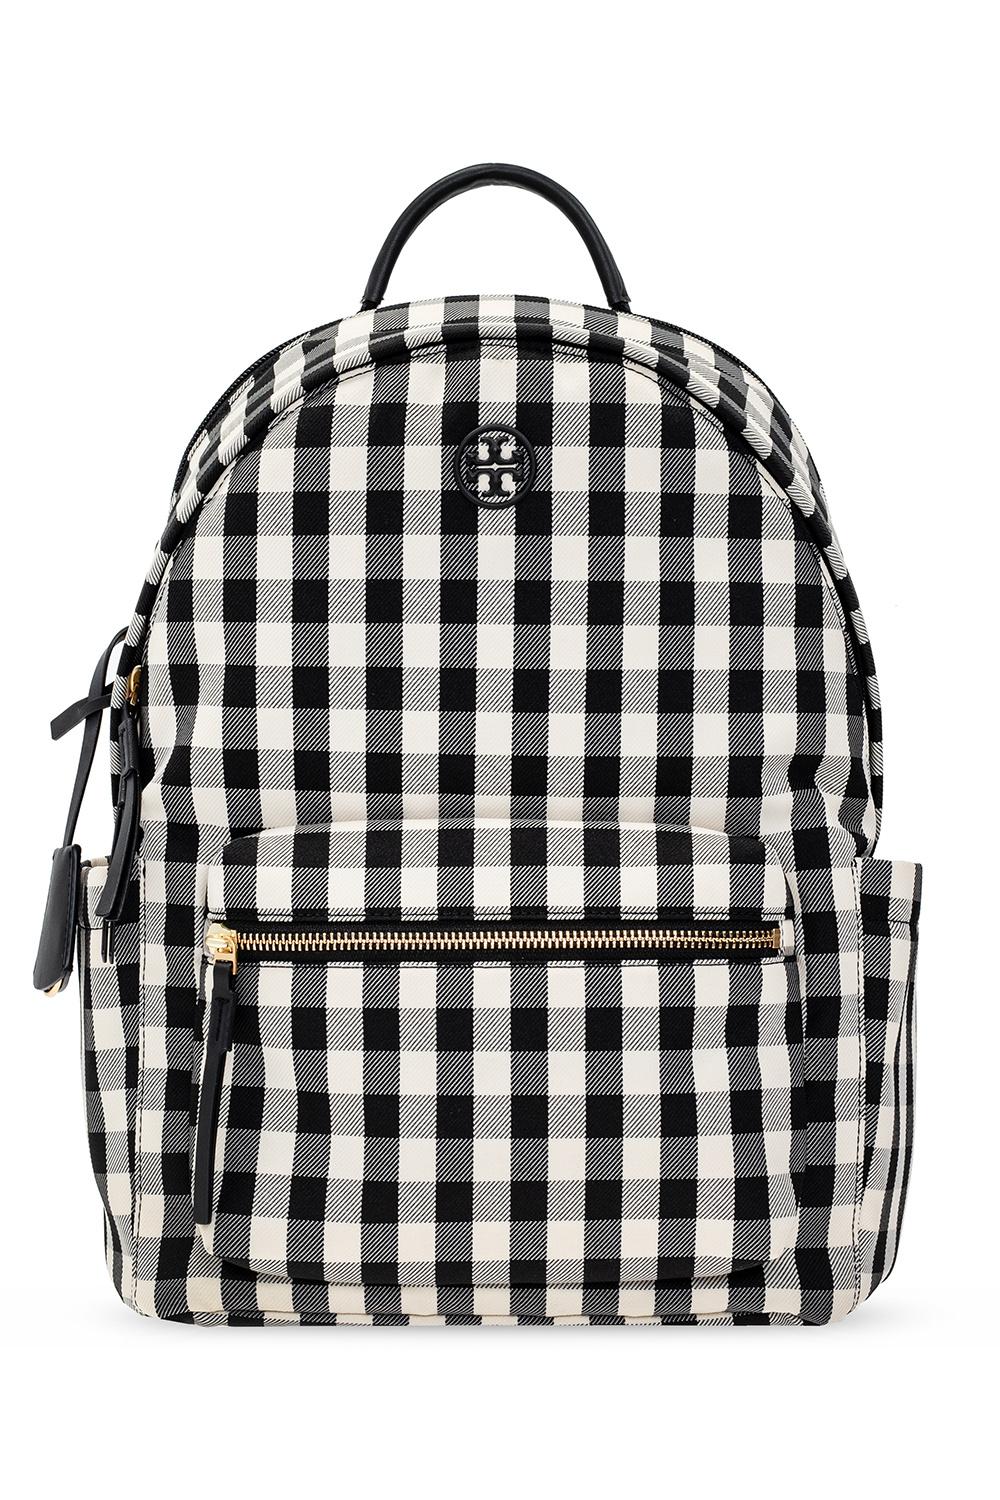 Tory Burch Synthetic Piper Gingham Backpack in Black | Lyst